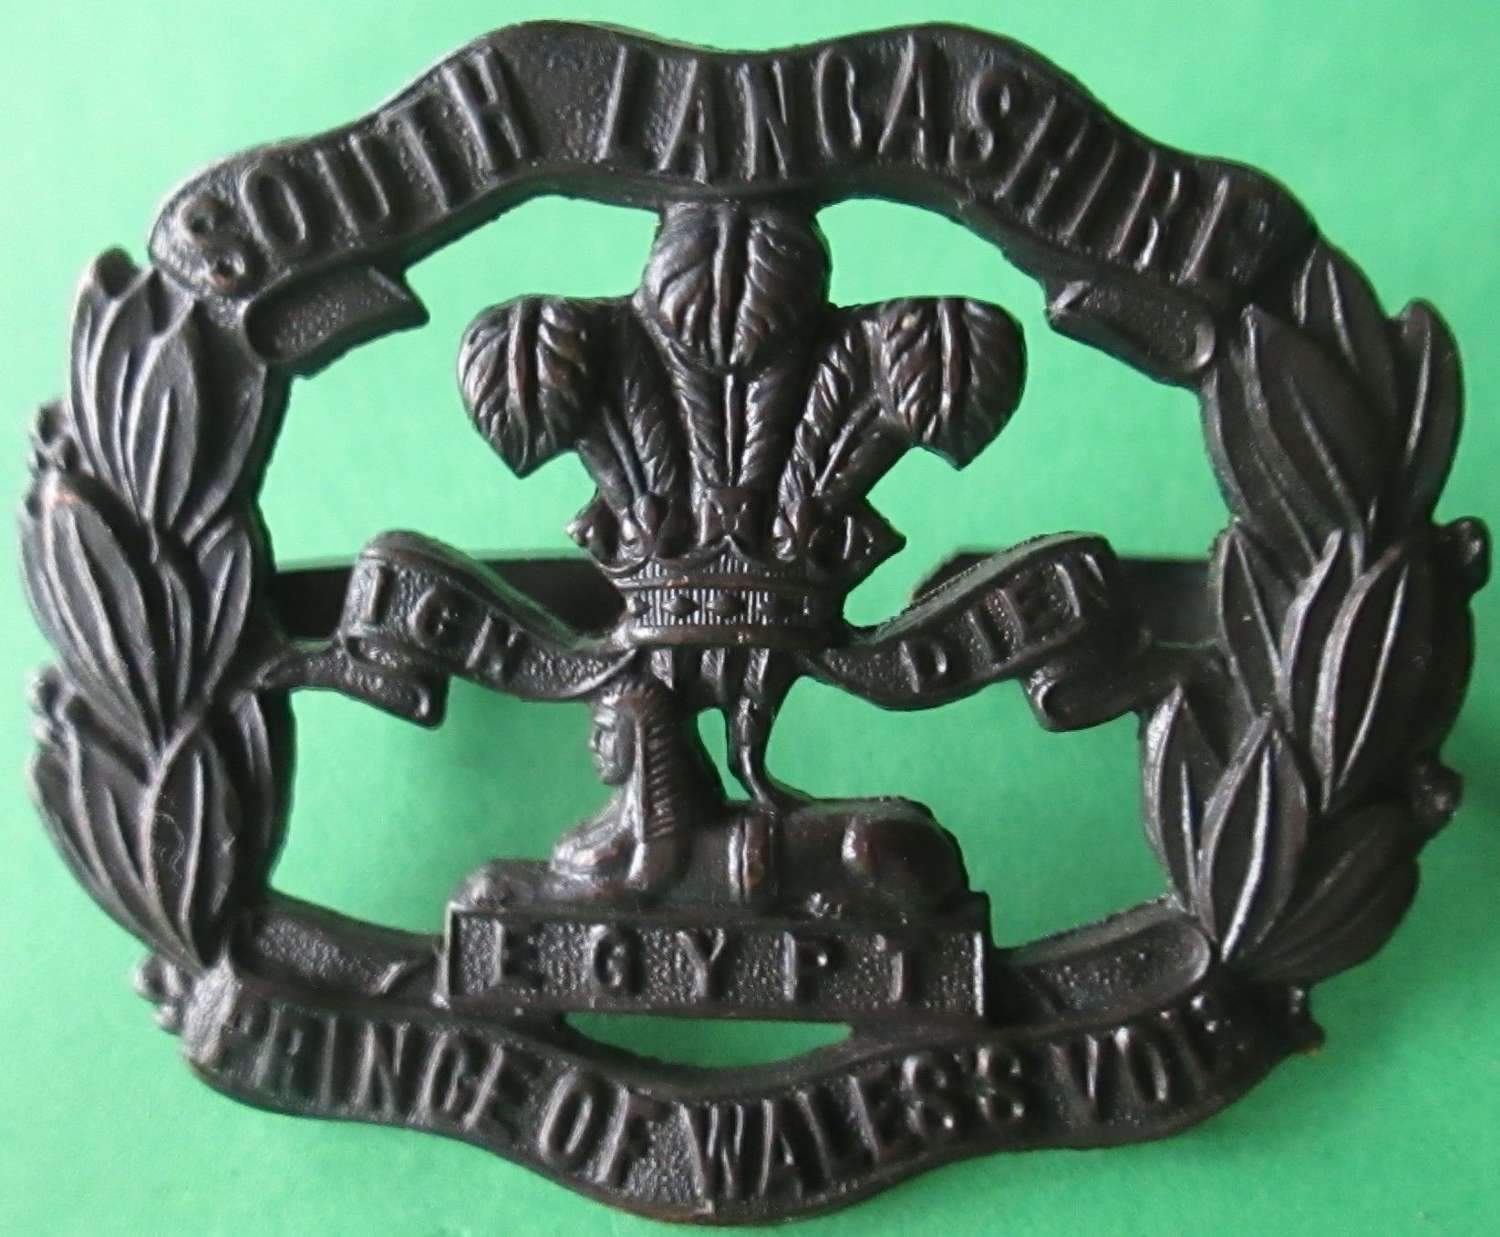 A SOUTH LANCASHIRE ( PRINCE OF WALES VOLUNTEERS ) BRONZE CAP BADGE